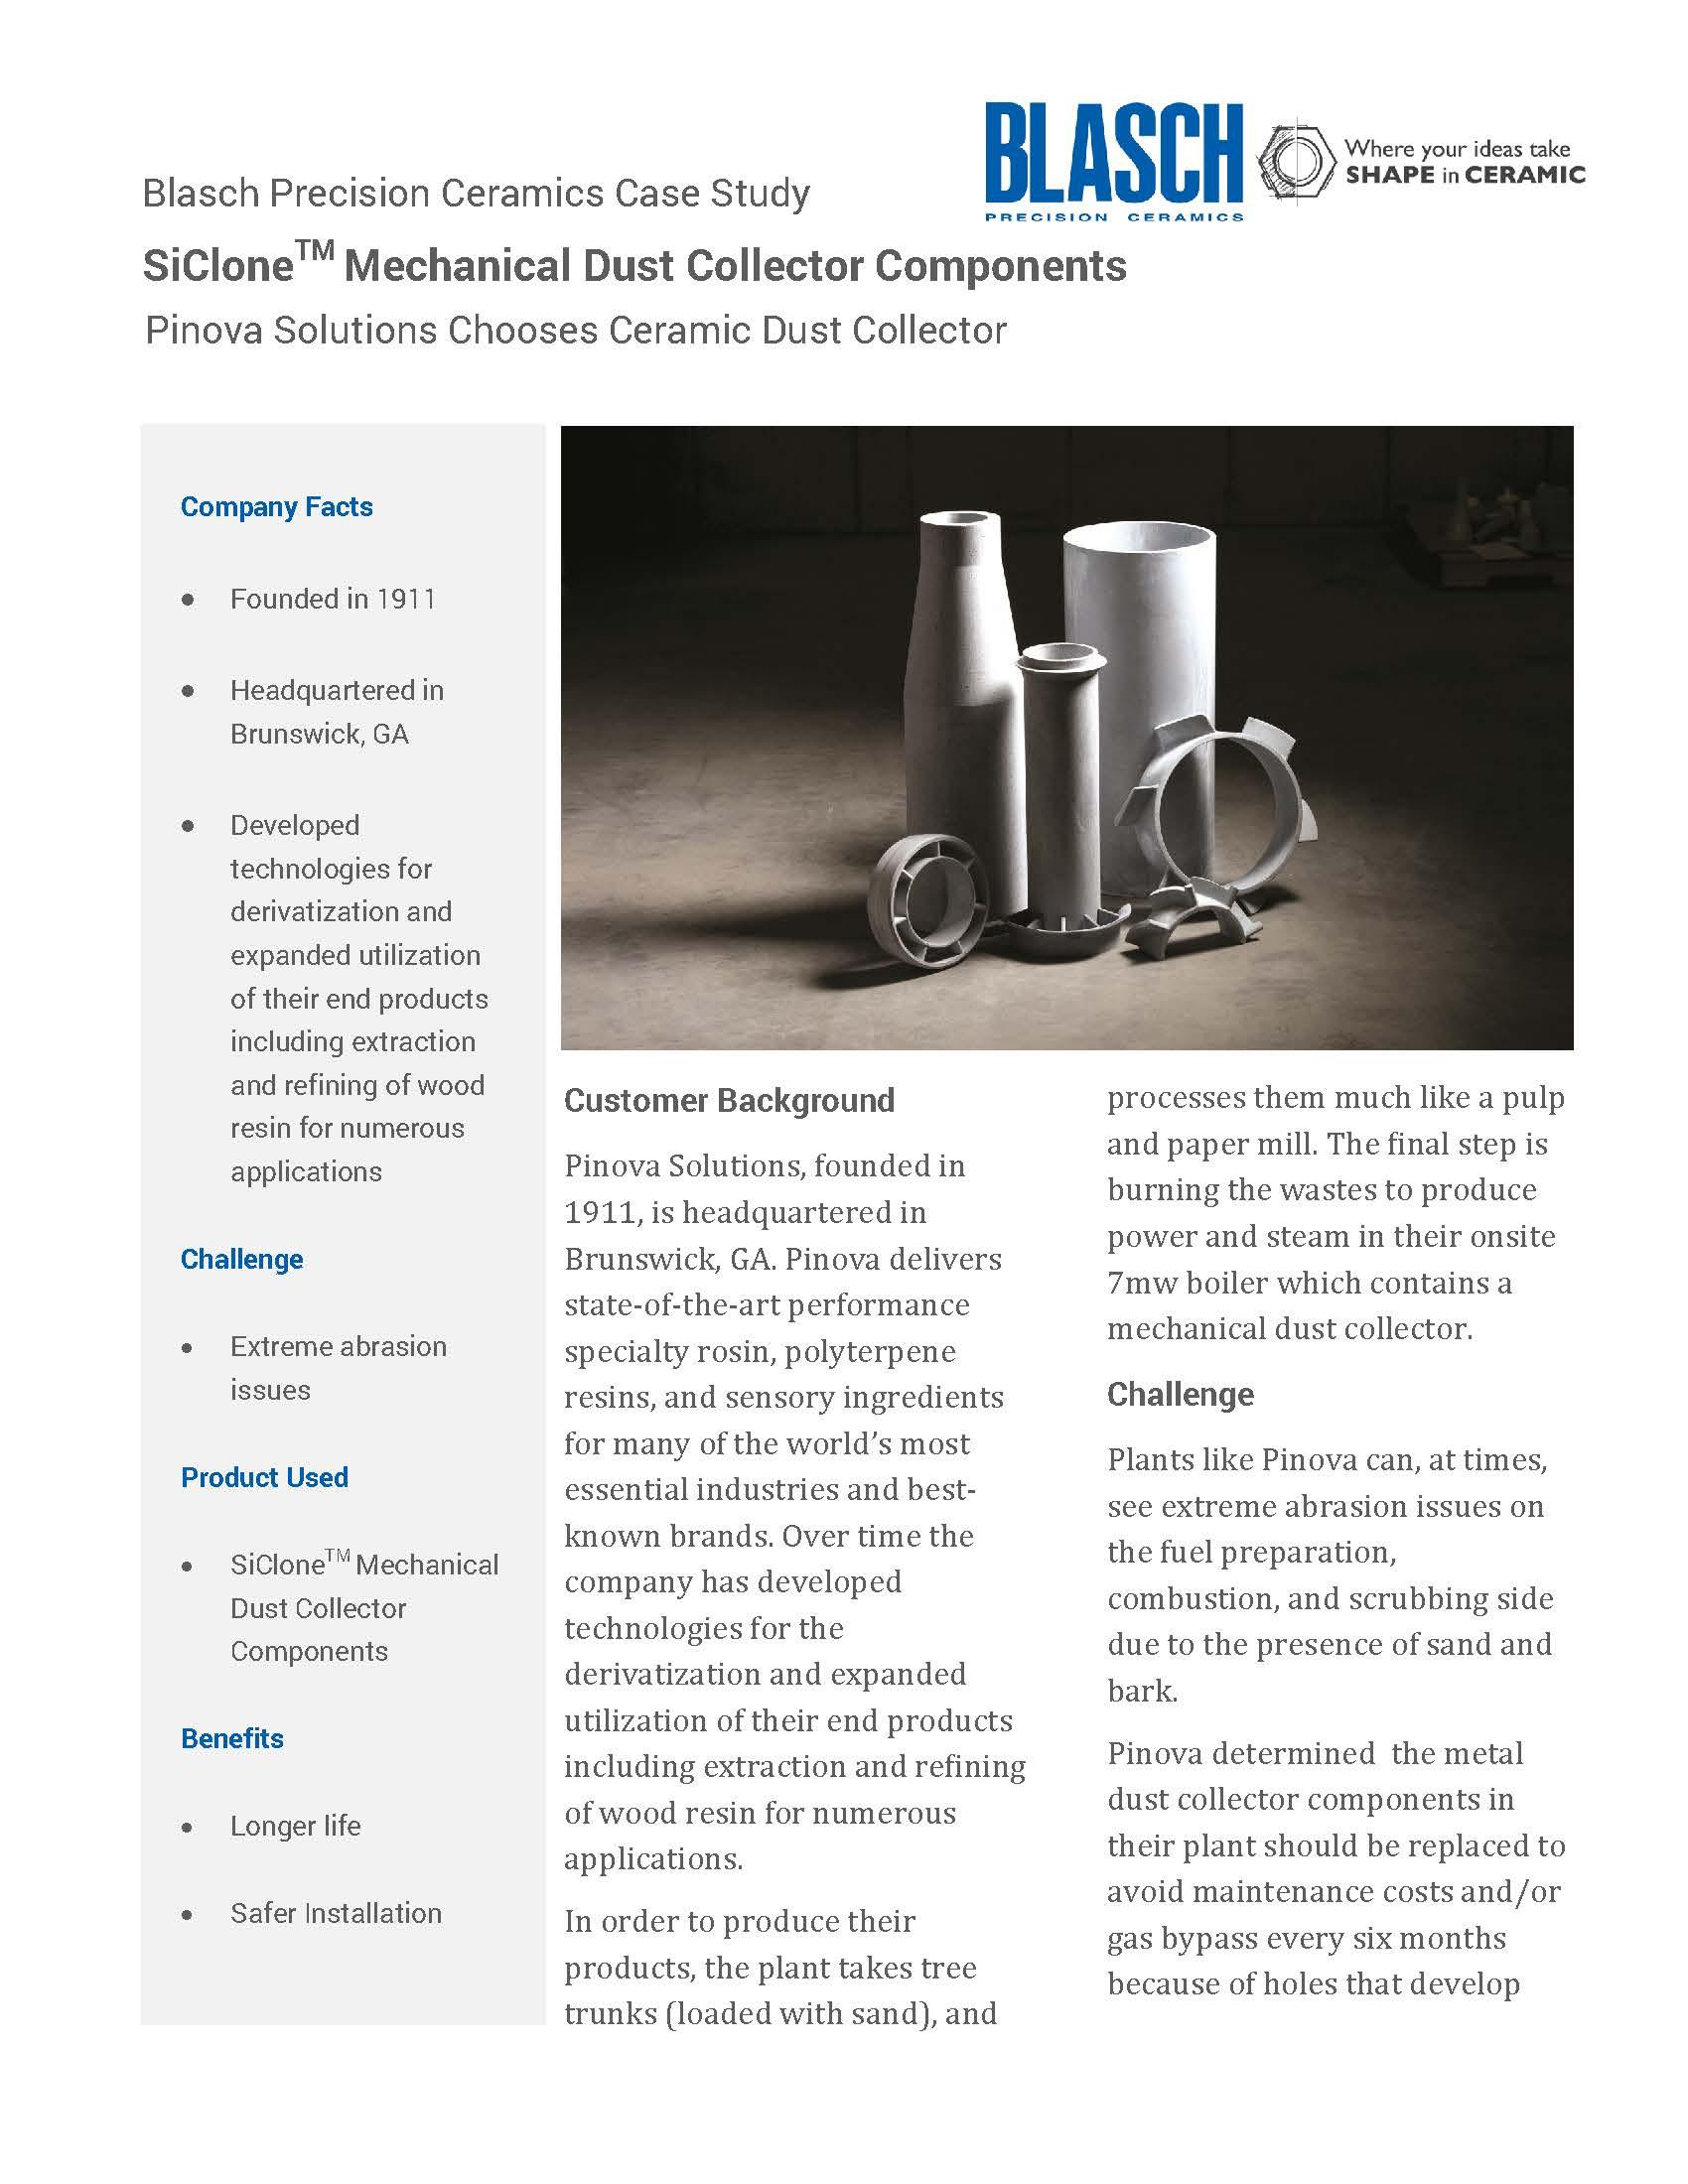 First page of the "SiClone Mechanical Dust Collector Components" case study.